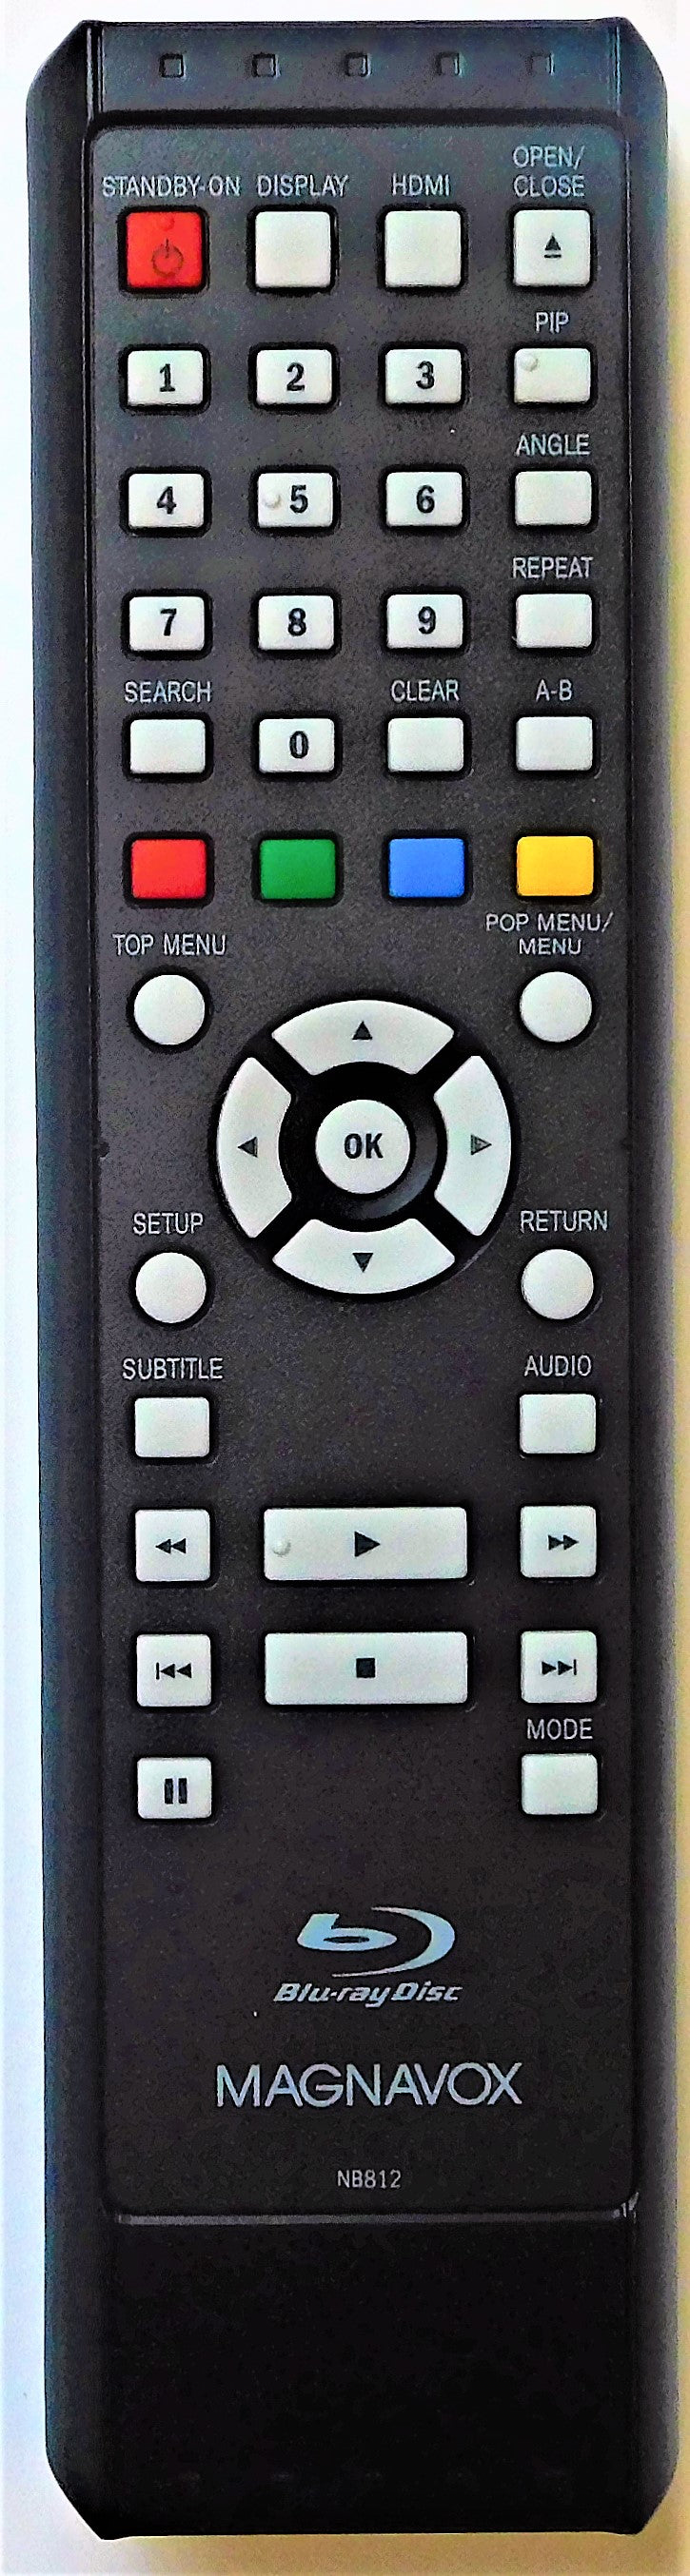 Original OEM replacement remote control for Magnavox Blu-ray players NB812UD